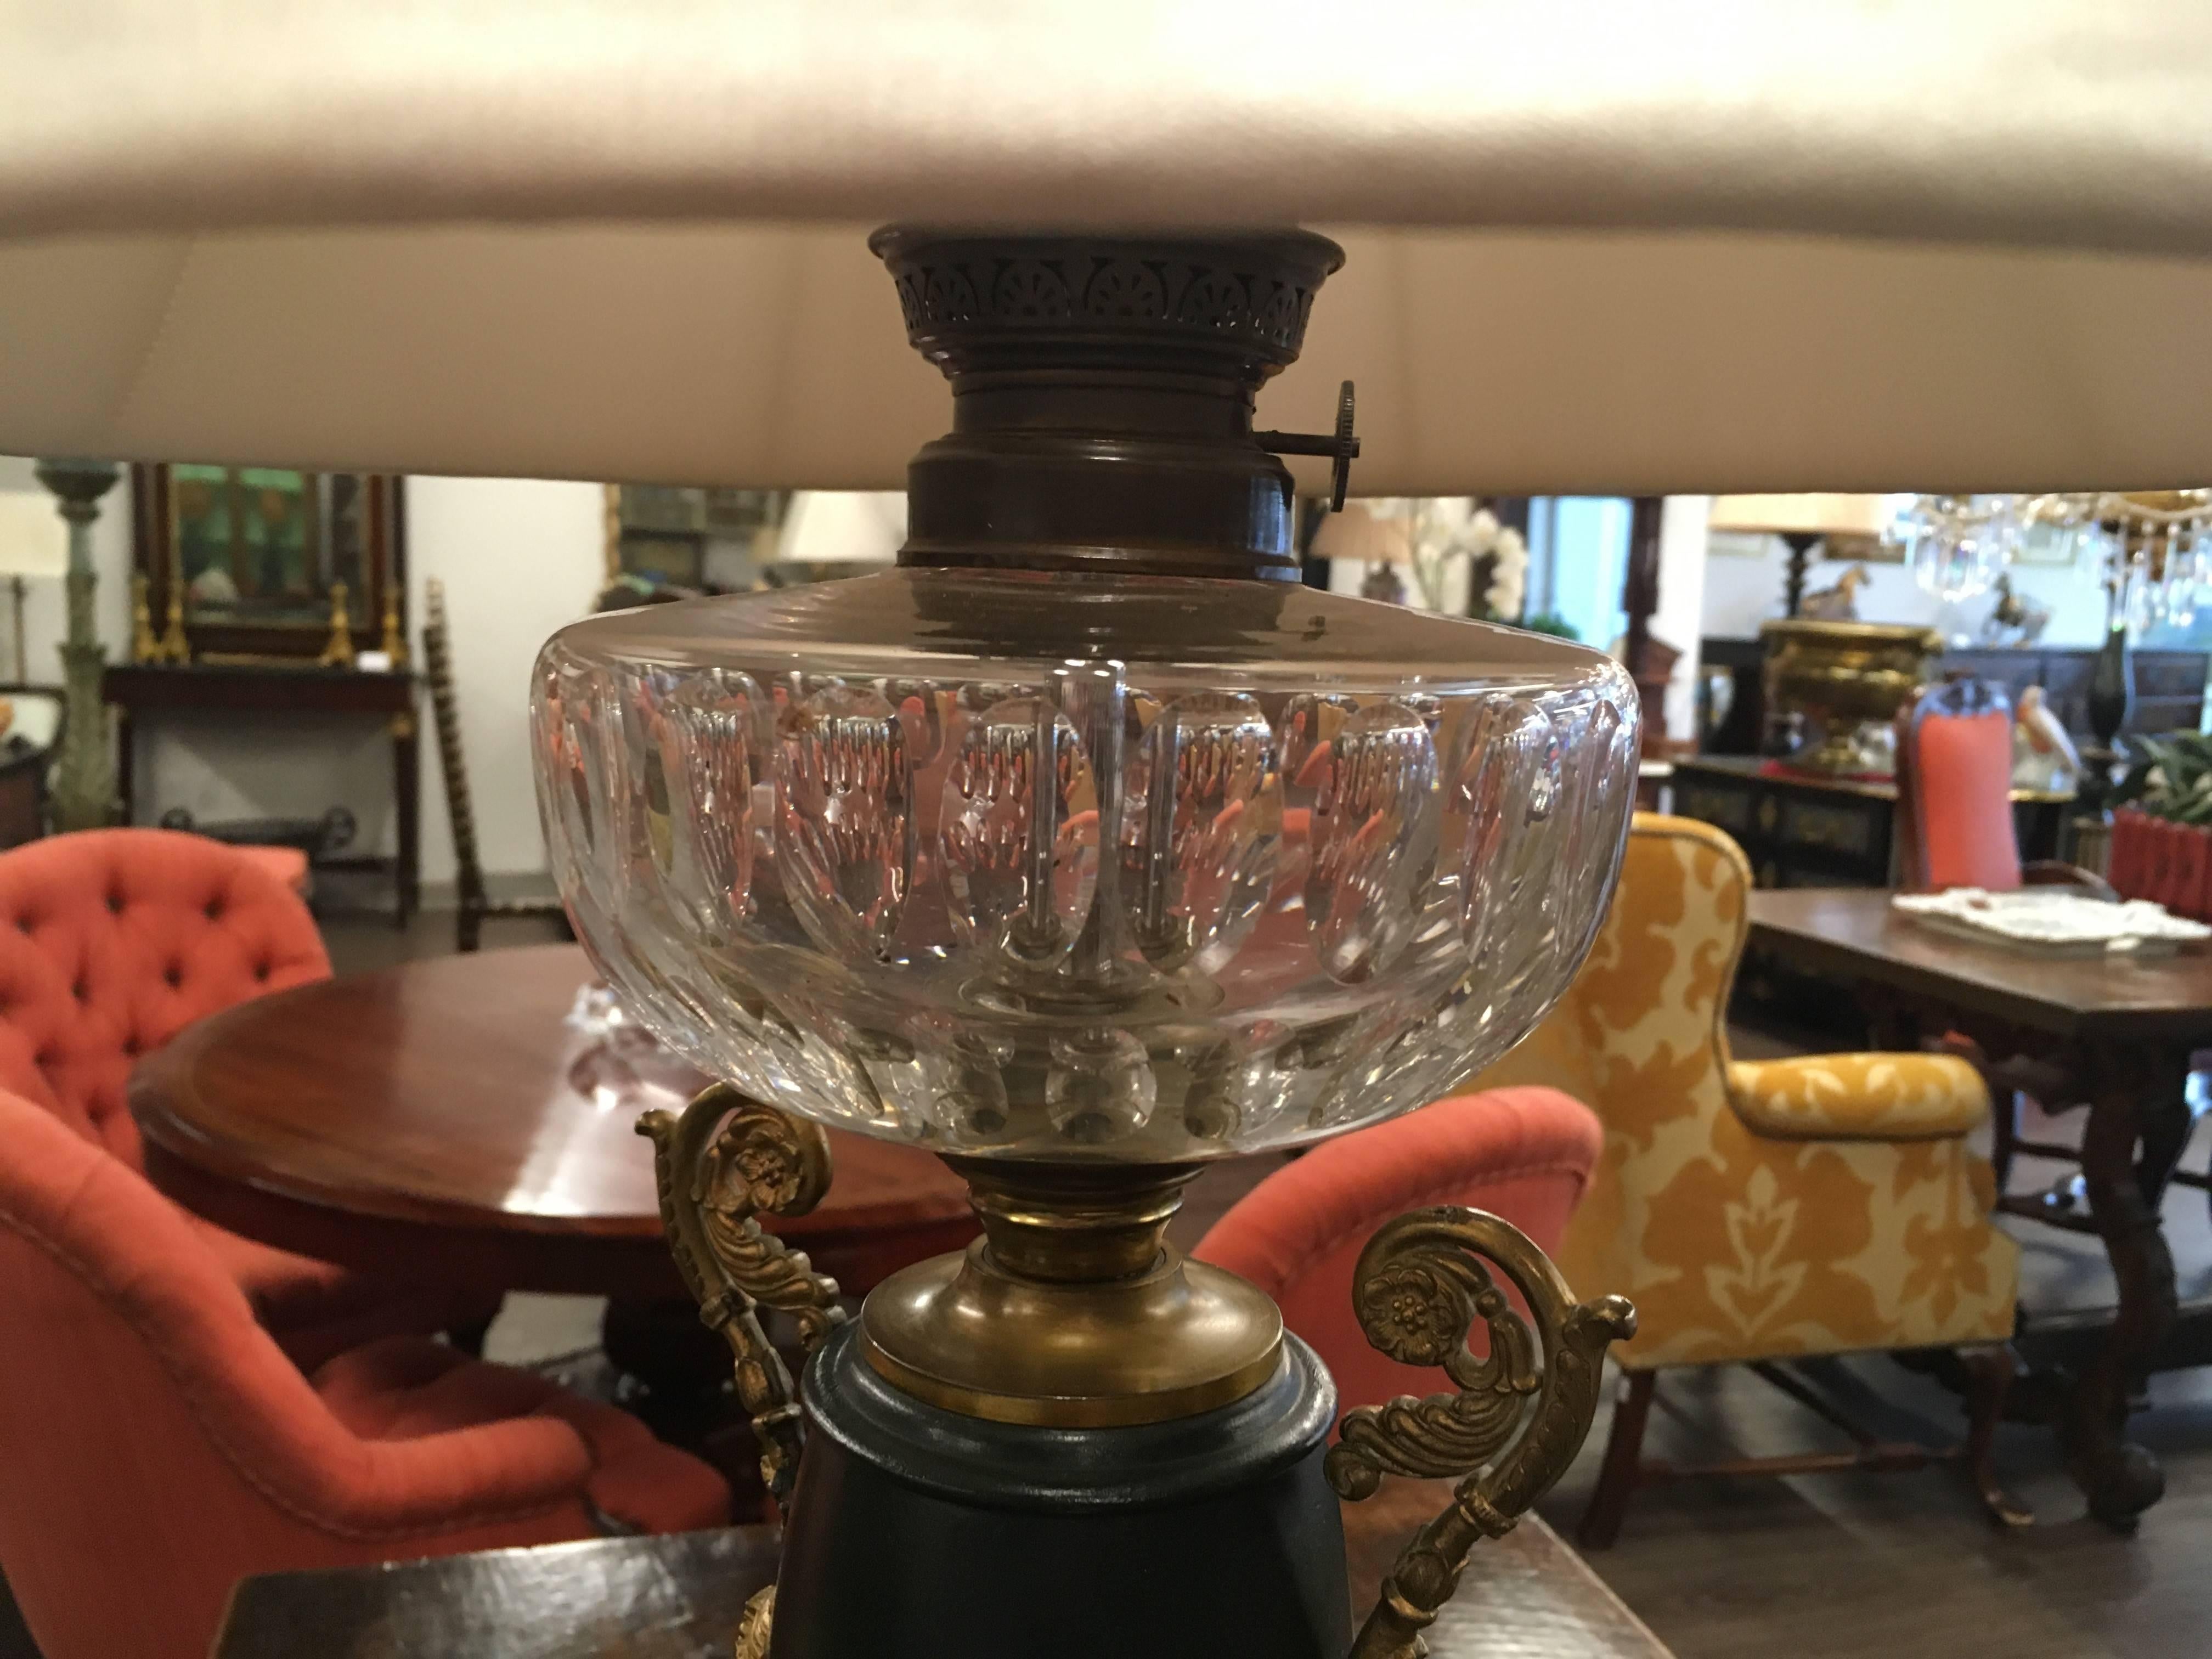 Impressive pair of characteristically neoclassical black and gold urn form table lamps on marble pedestals and topped with fluted crystal fonts. The gilt bronze decorative 